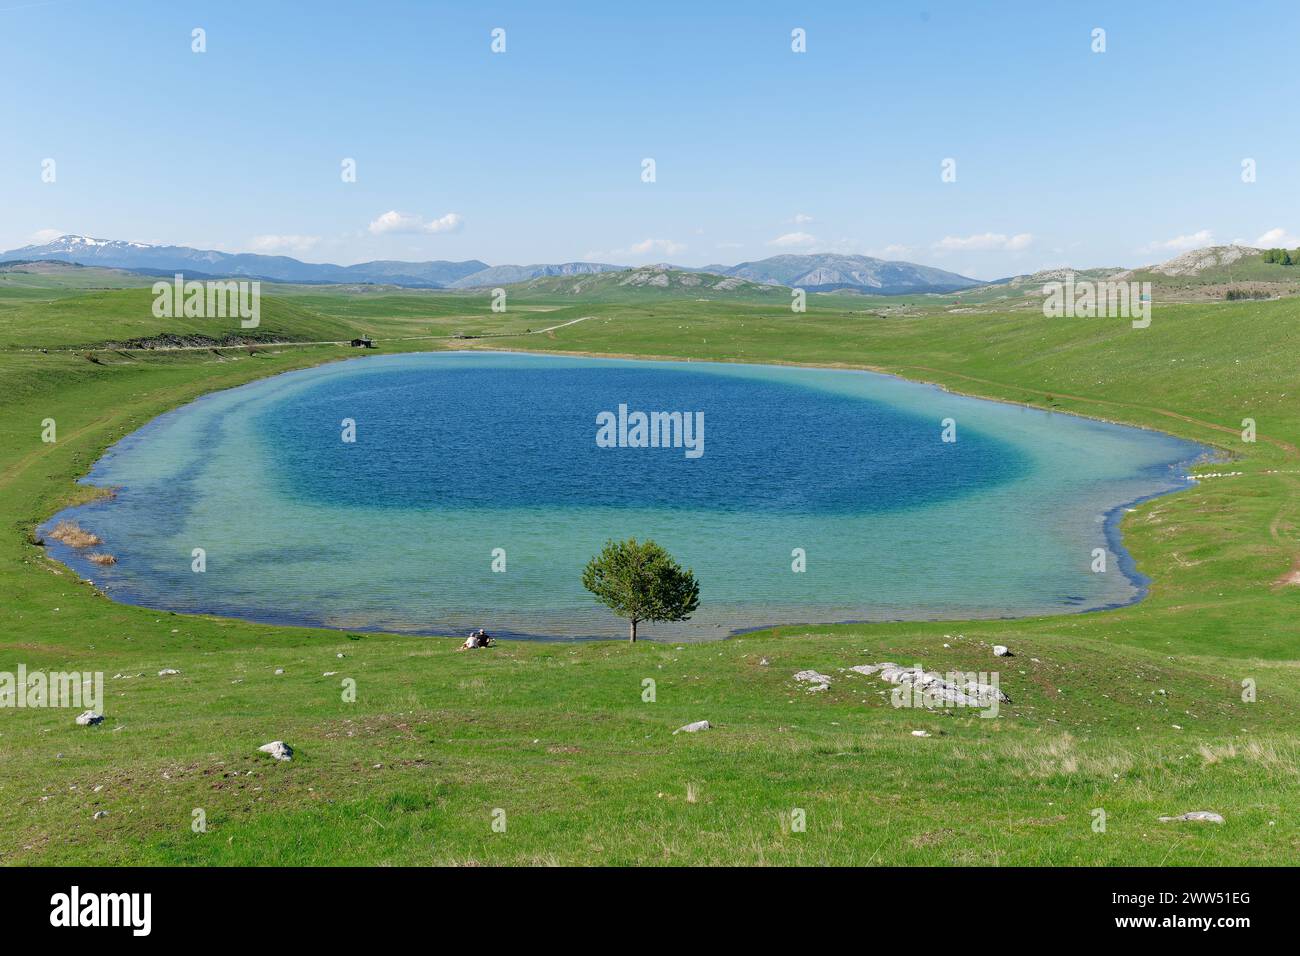 Vrazje lake or Devil lake in Durmitor National Park, Montenegro. Beautiful vibrant colors of the blue water and green grass. Stock Photo